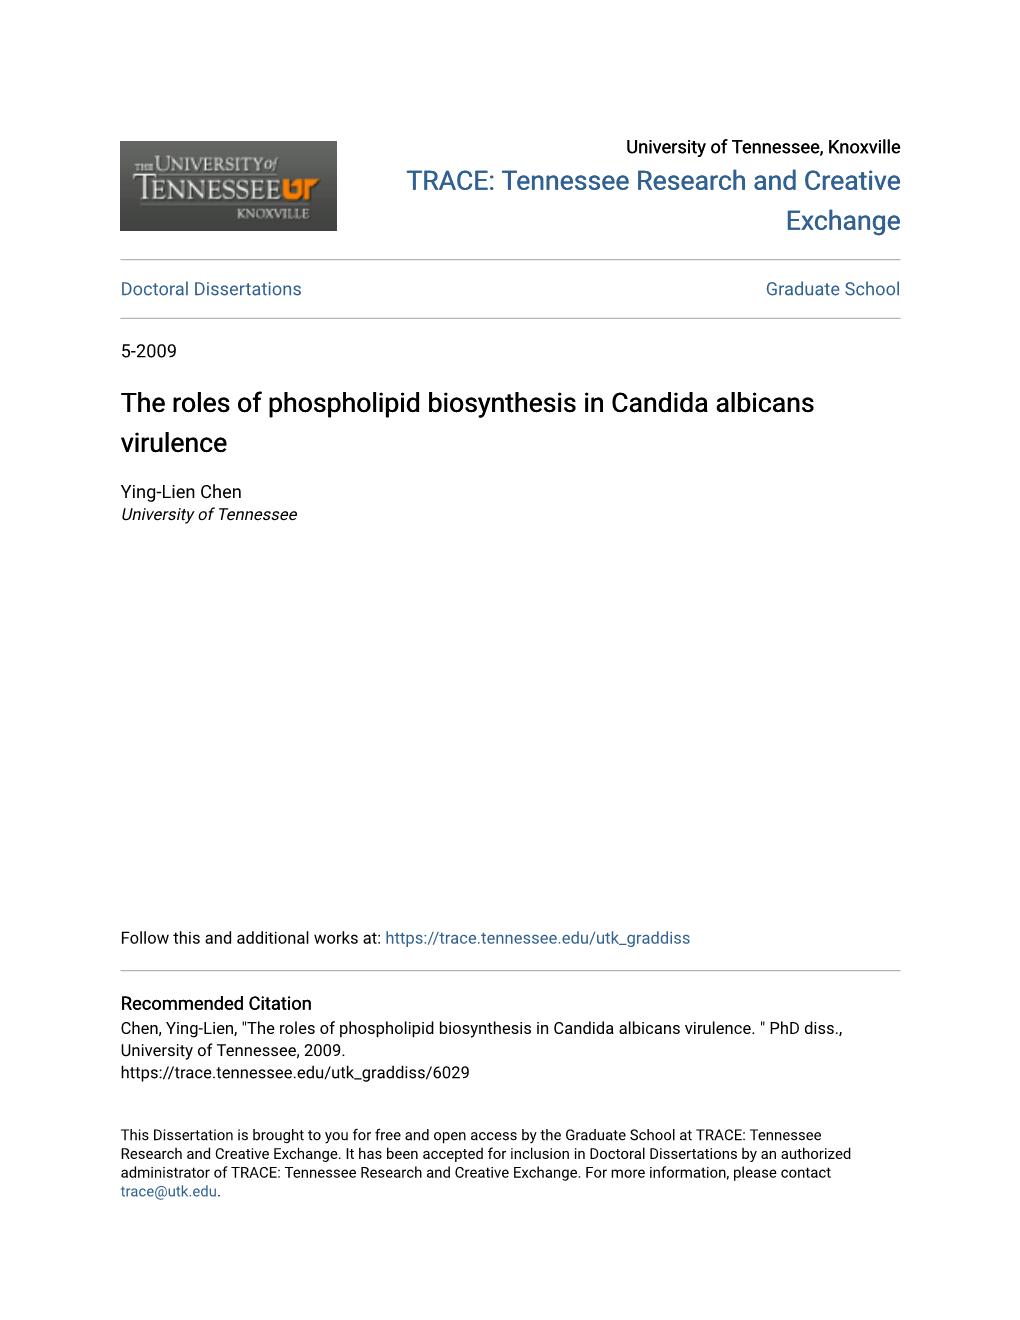 The Roles of Phospholipid Biosynthesis in Candida Albicans Virulence